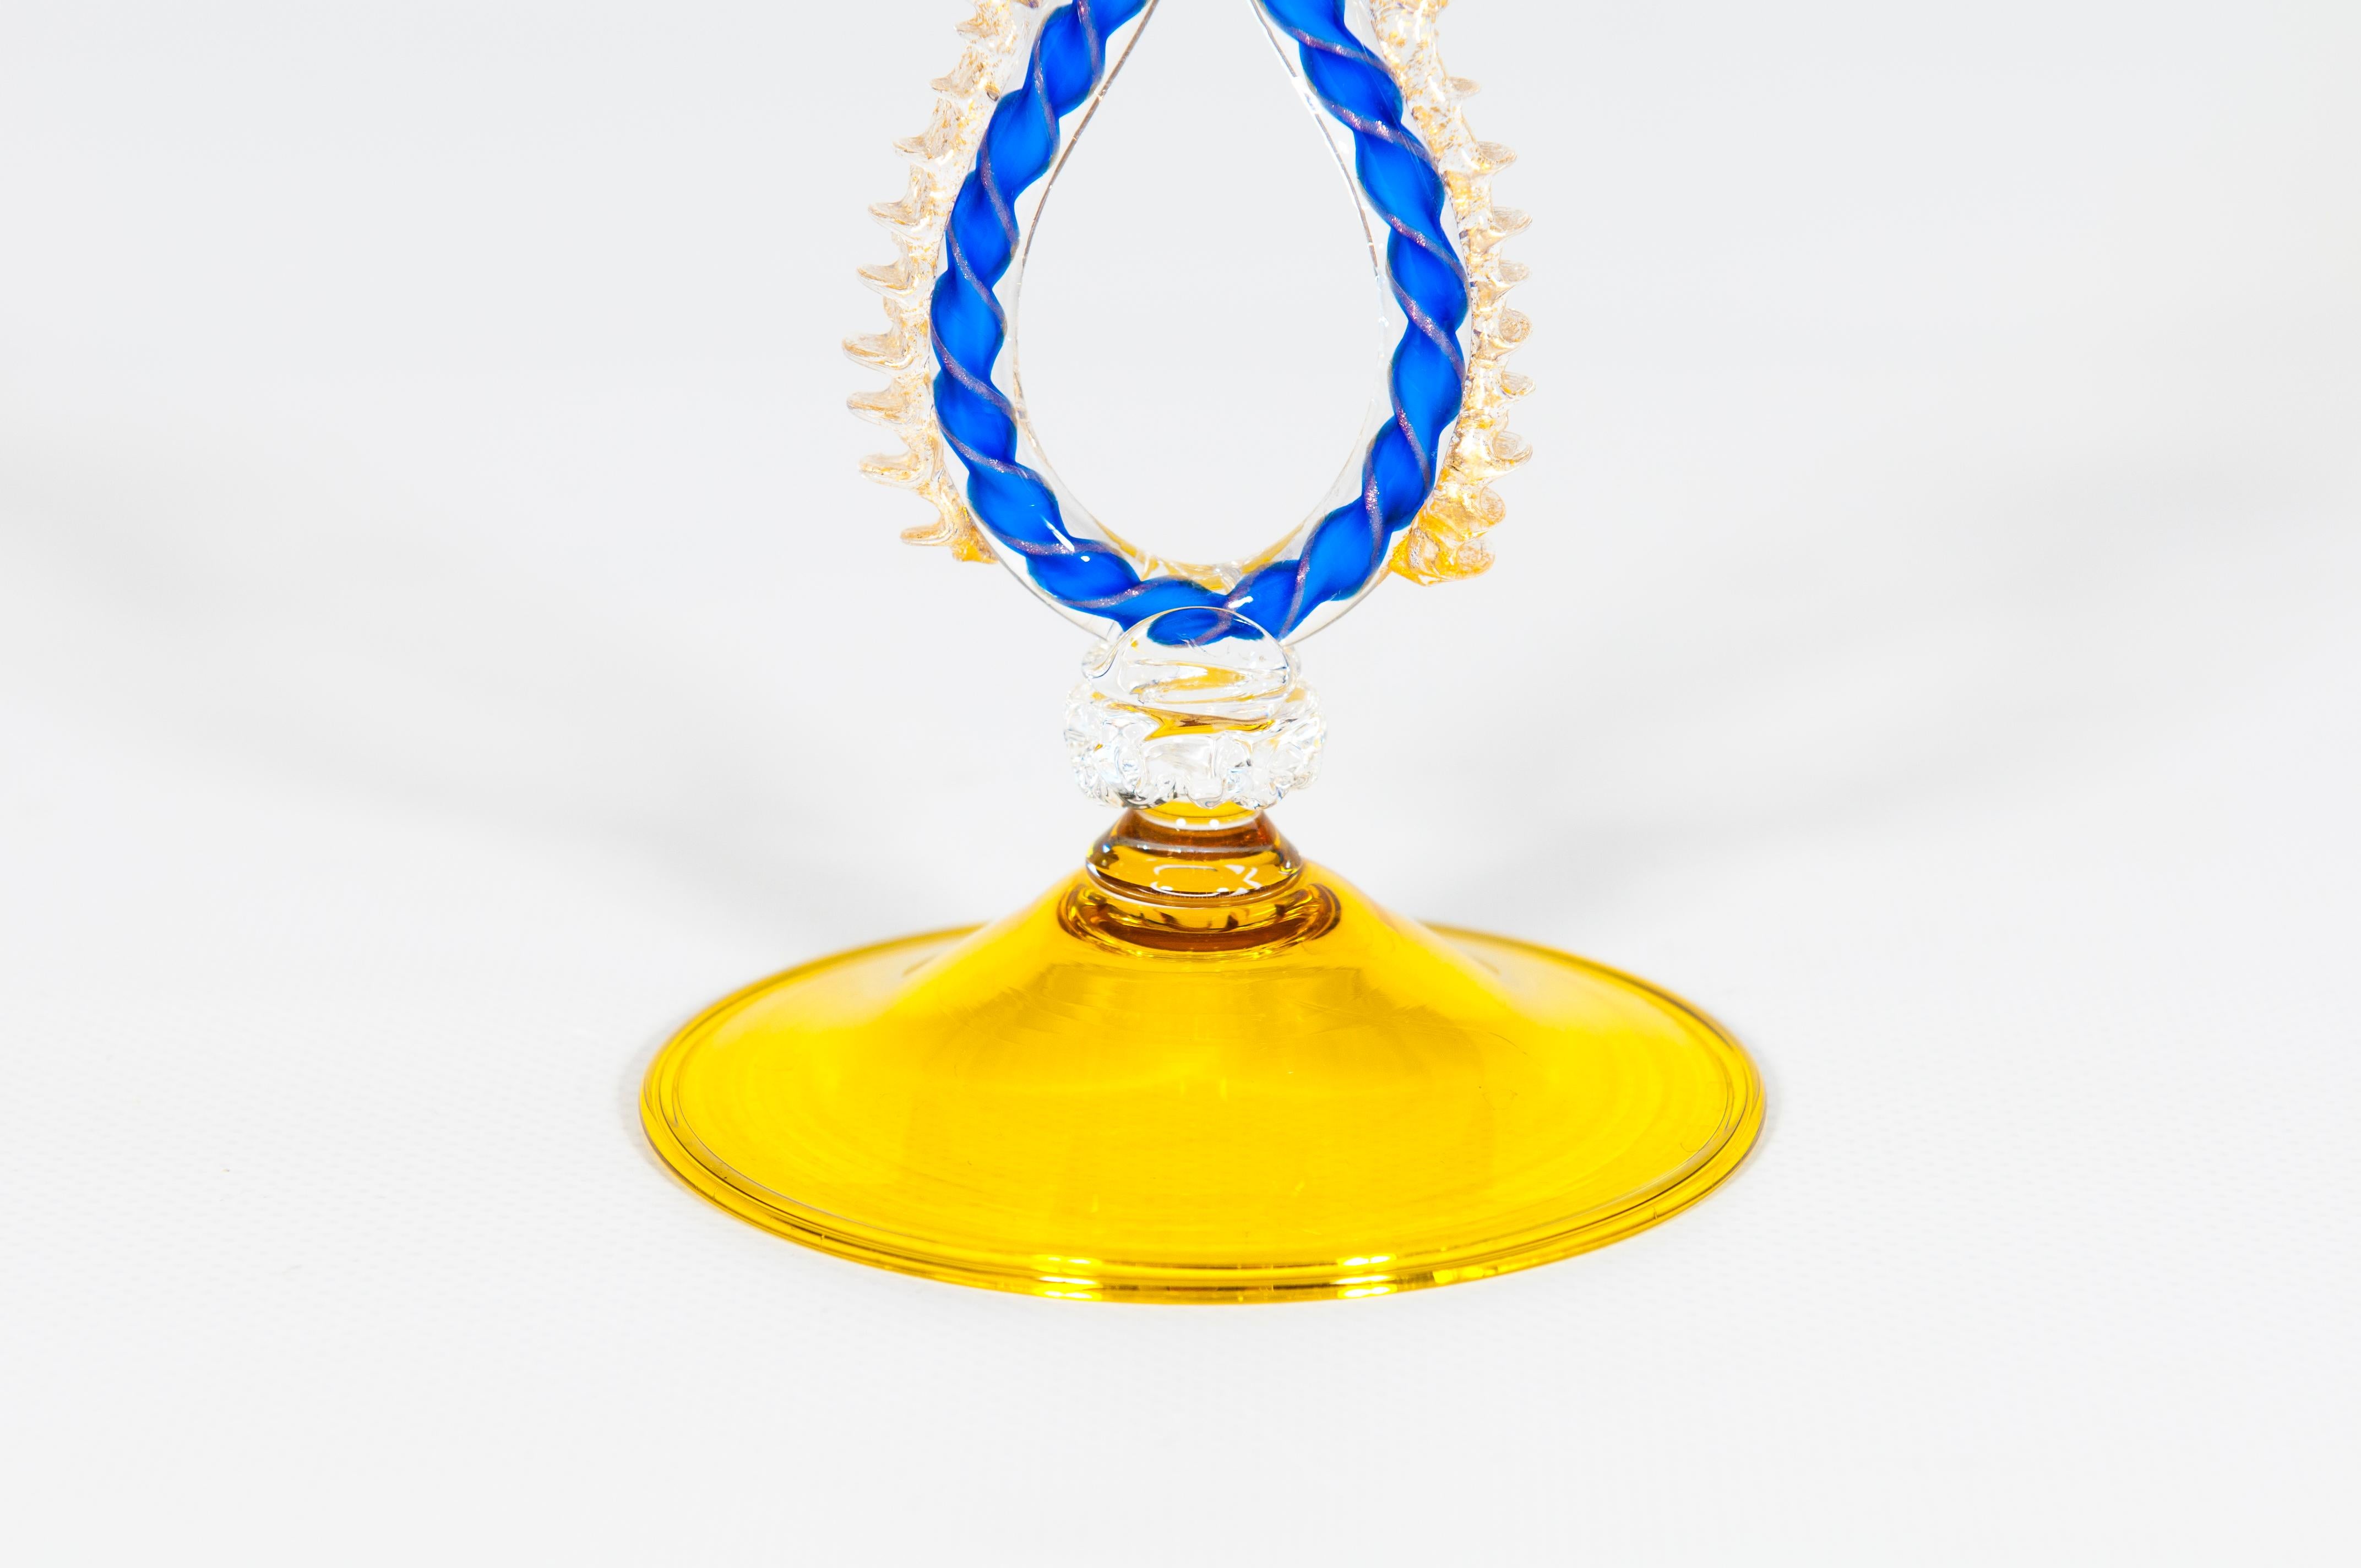 Mid-Century Modern Yellow and Blue Venetian Goblet with Gold Finishes in Murano Glass, Italy, 1990s